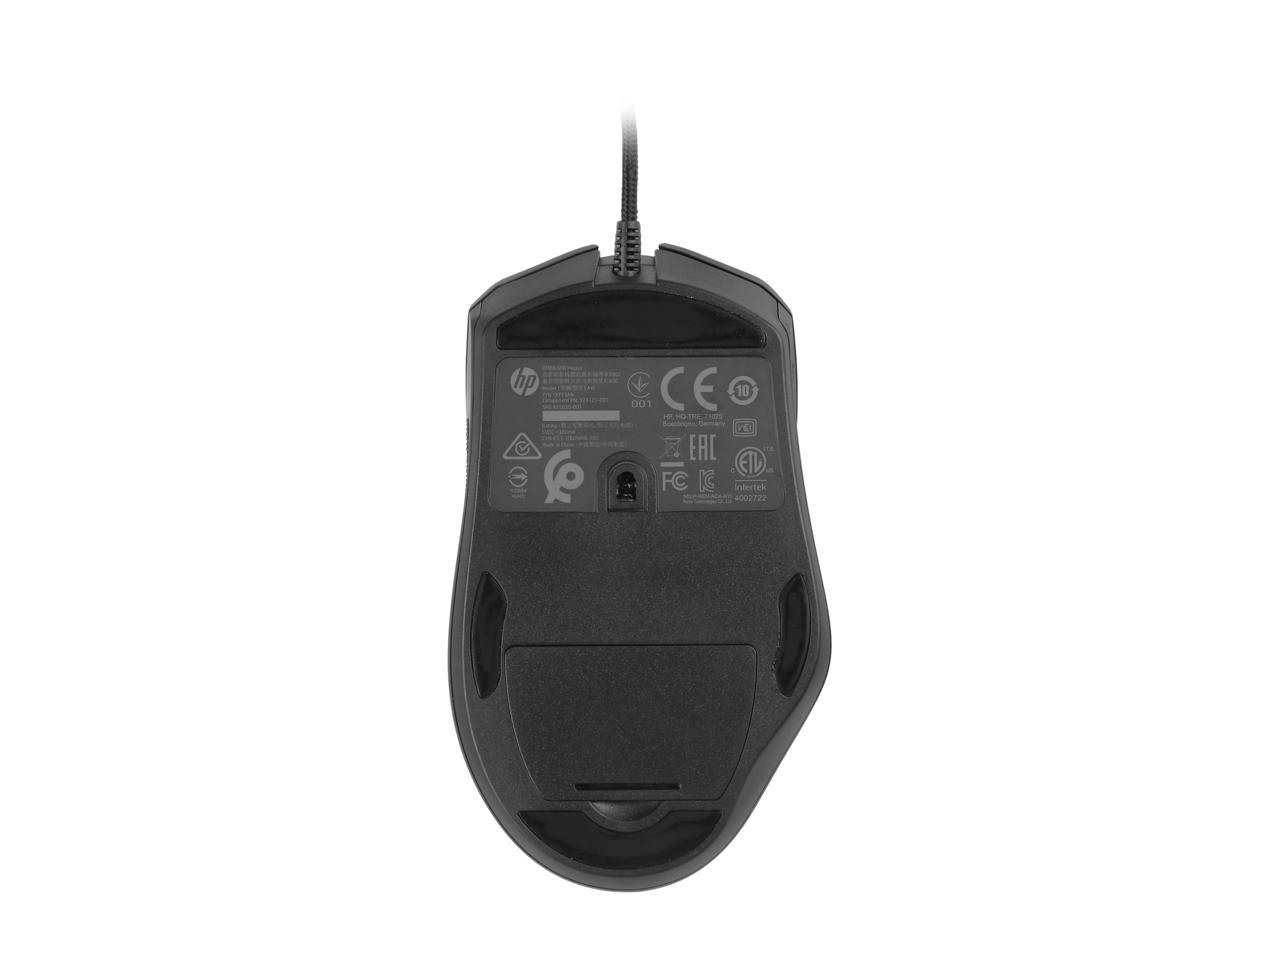 OMEN by HP Mouse 600 Wired Optical Gaming Mouse with 6 Buttons, 12000 dpi, RGB Backlit LED